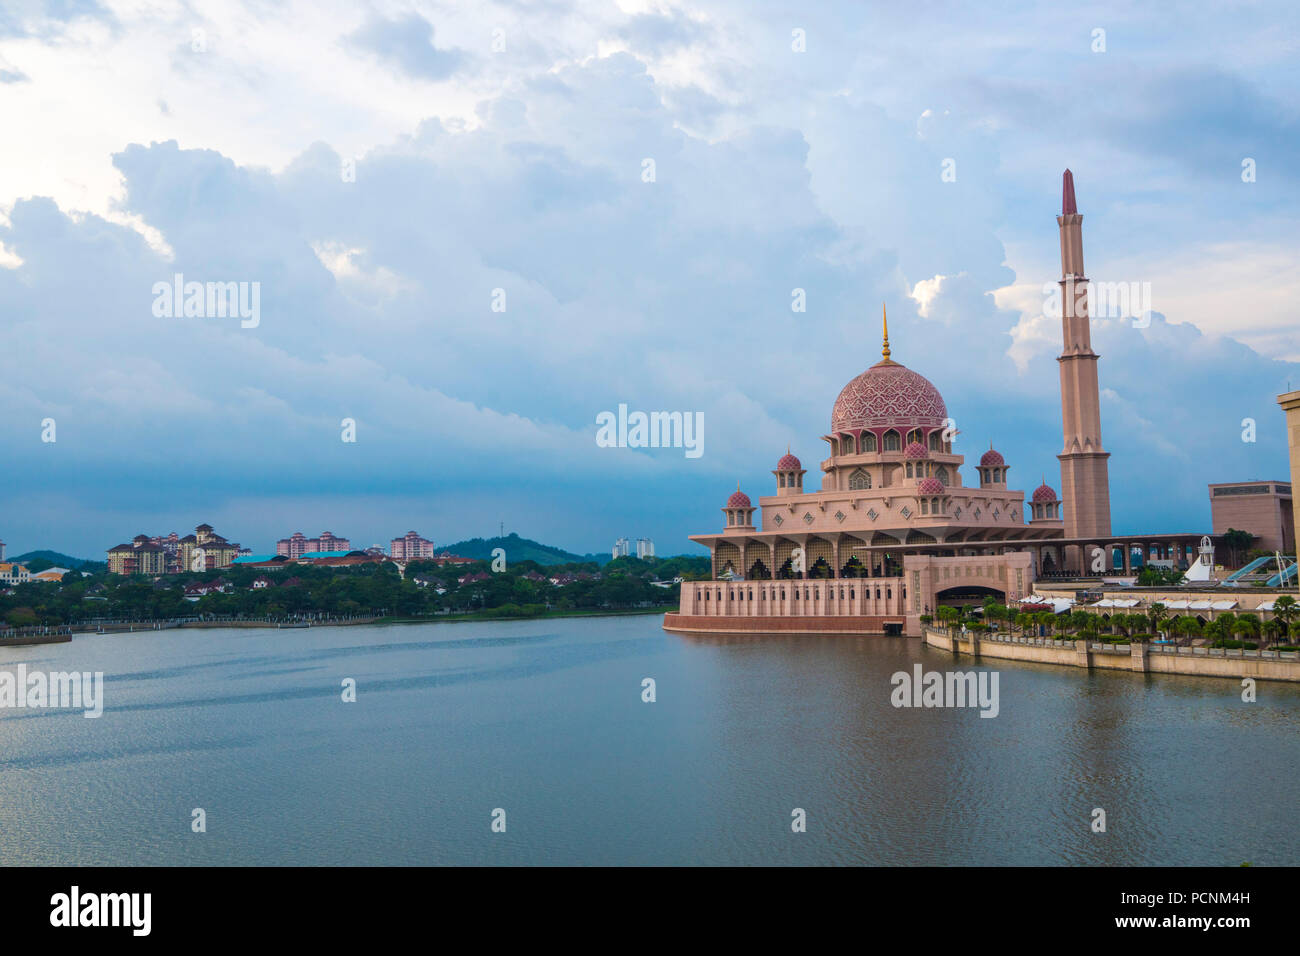 The Putra Mosque located in the Putrajaya, Malaysia which is made from rose-colored granite with a pink dome overlooking the Putrajaya Lake Stock Photo